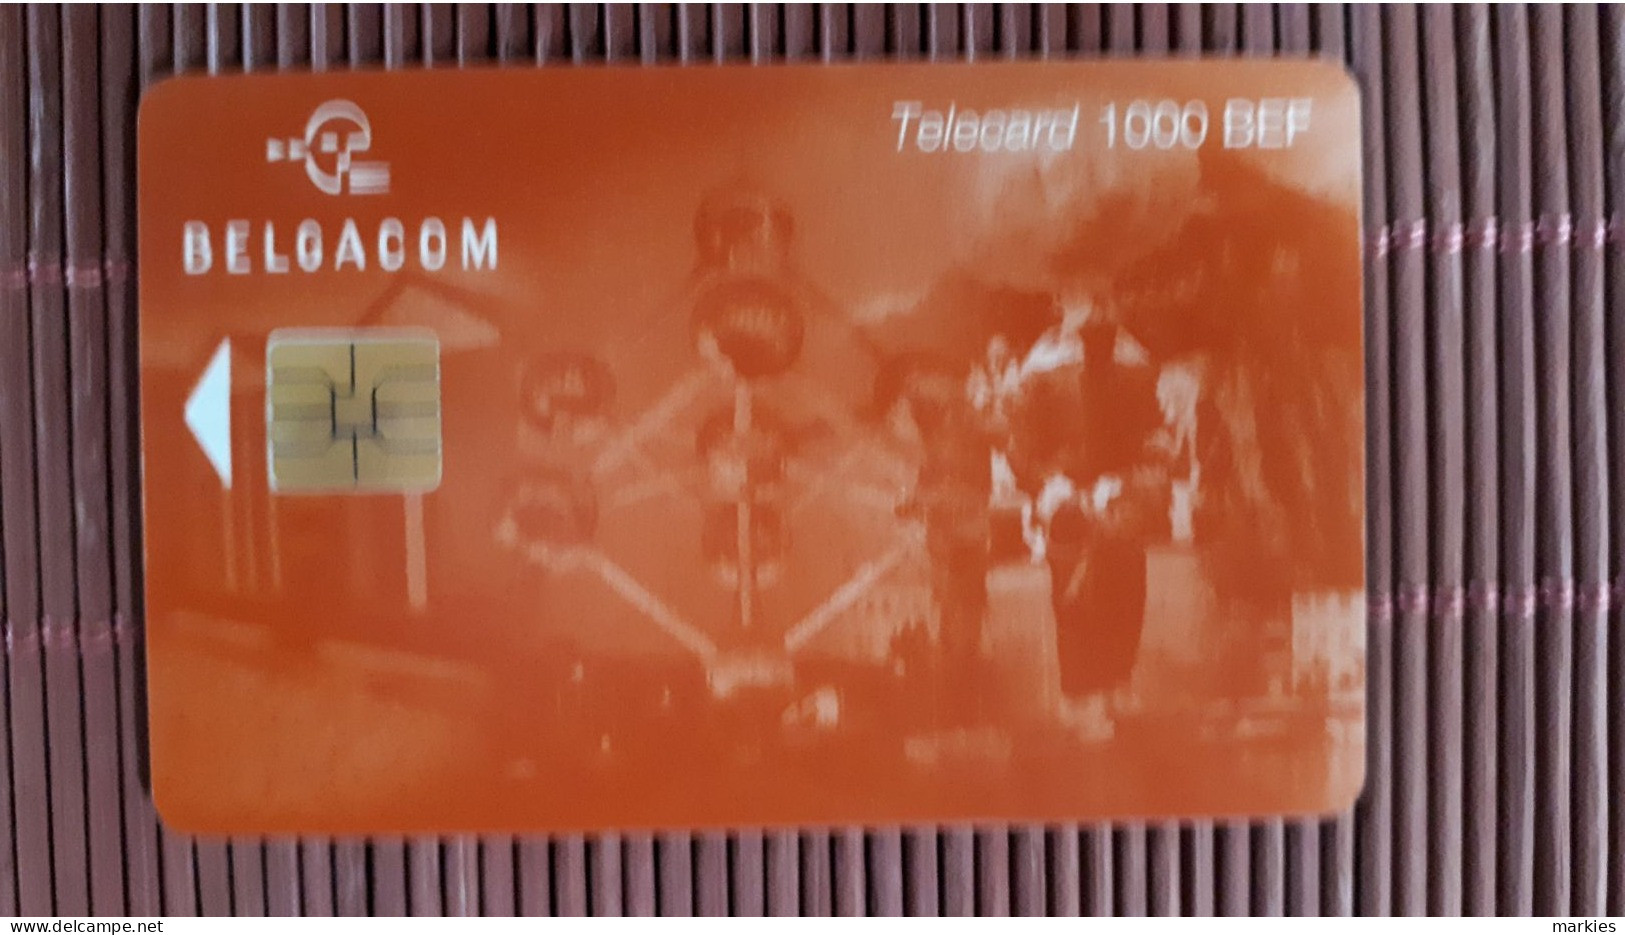 Atomium Phonecard  1000 BEF Used GI  30.08.2001 Low Issue Rare - Con Chip